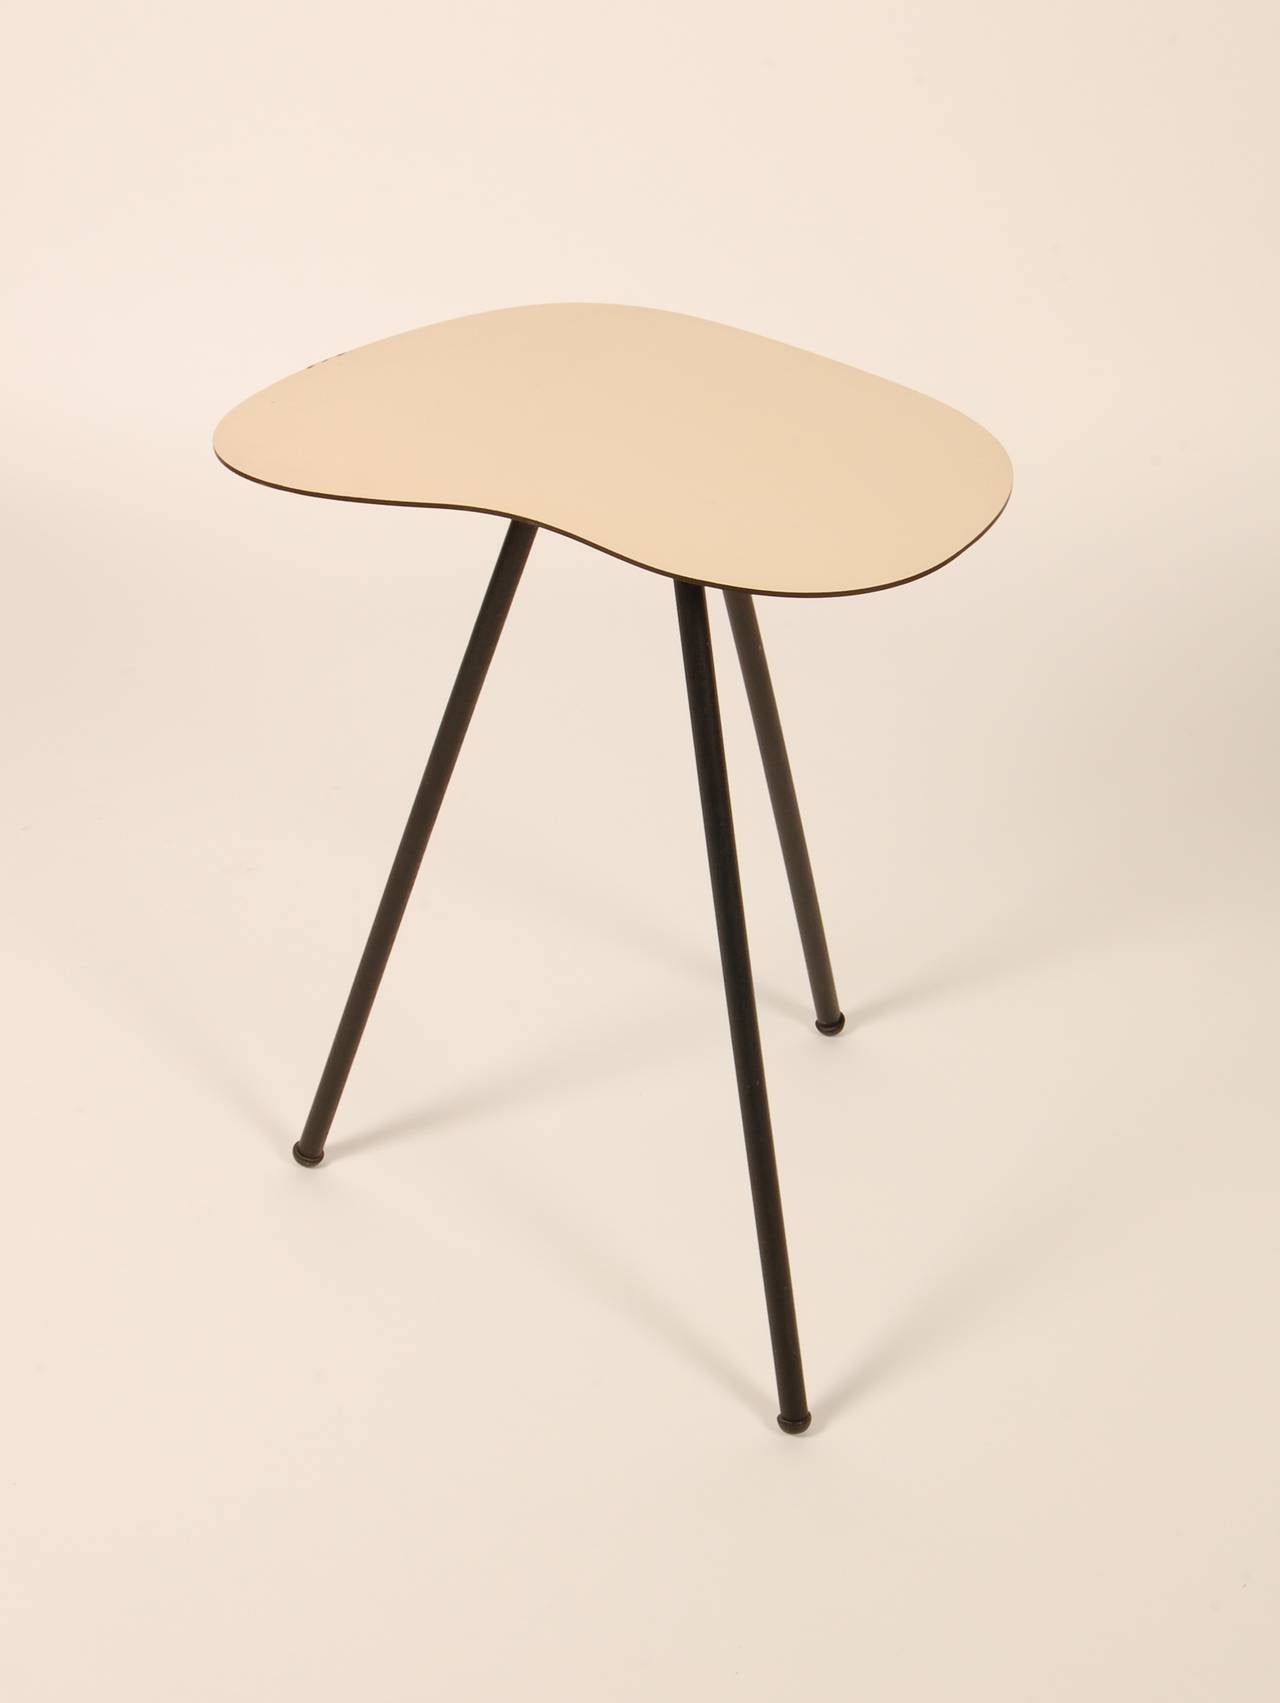 Petite three legged side table with a free form top. Constructed of an off white laminate top and black lacquered wood legs. Wonderful painters palate form with a very 1950s approach to the three legged table. Labeled by the marker.